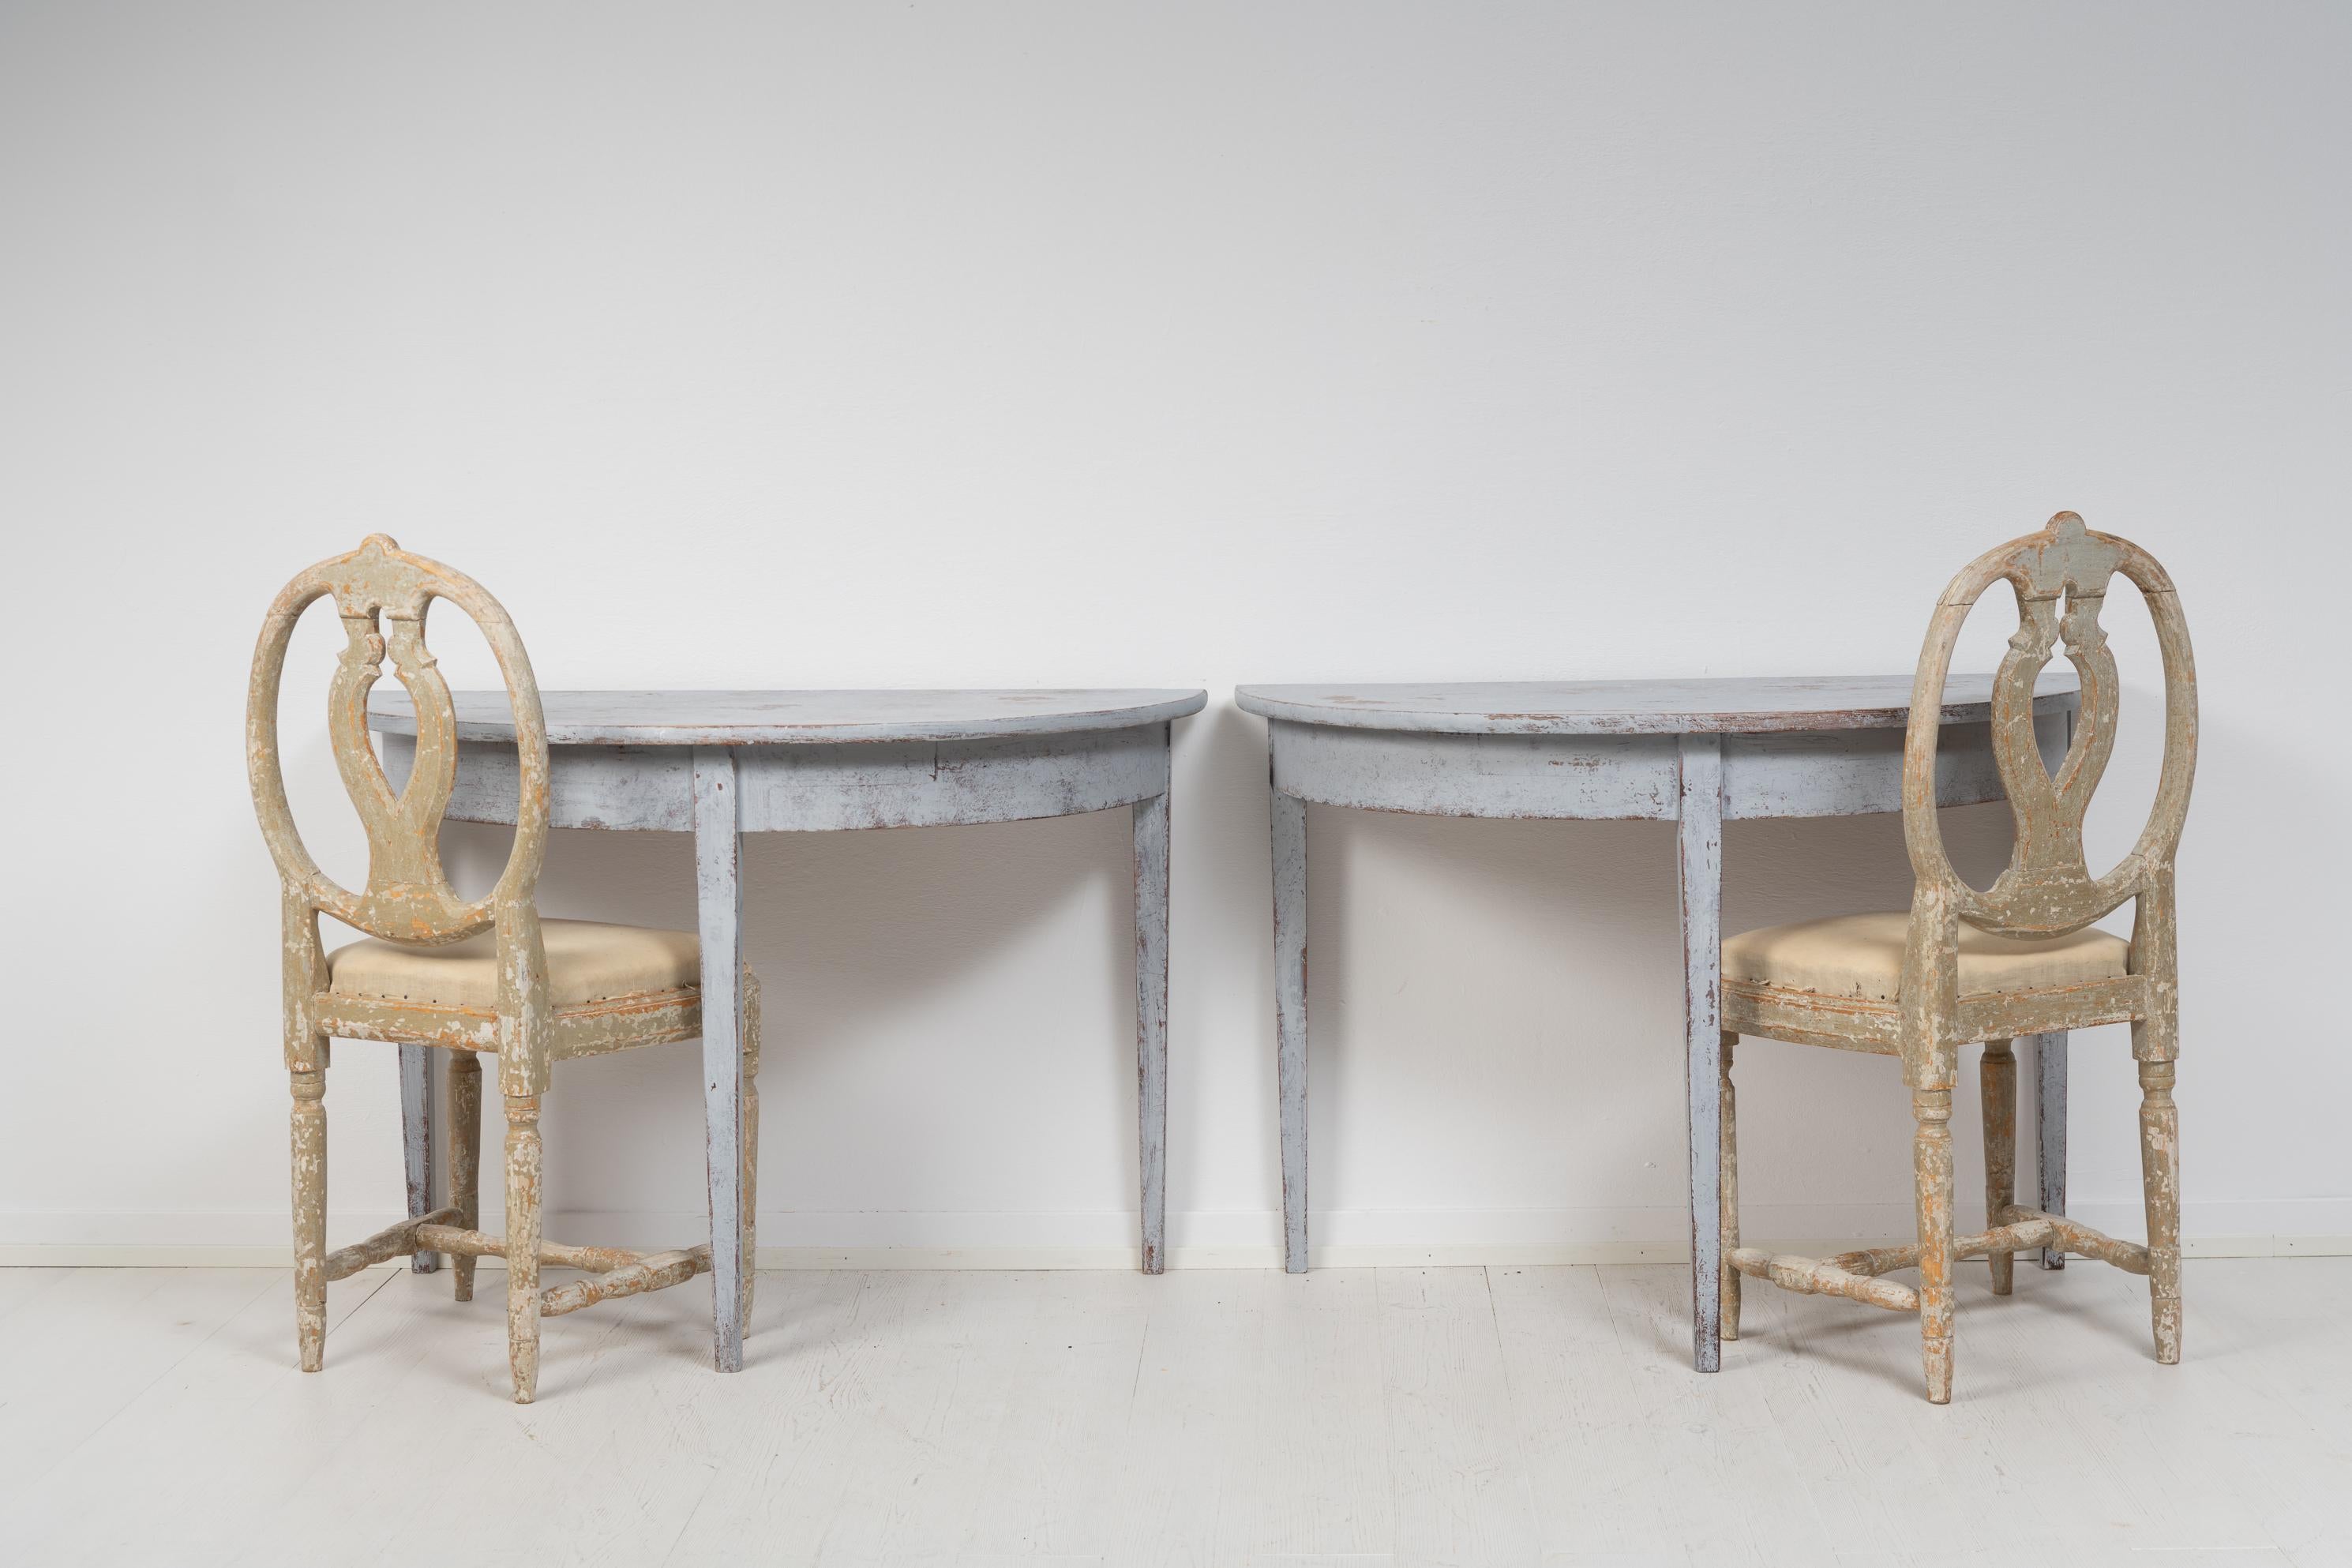 Hand-Crafted Mid-19th Century Swedish Gustavian Style Demi Lune Tables